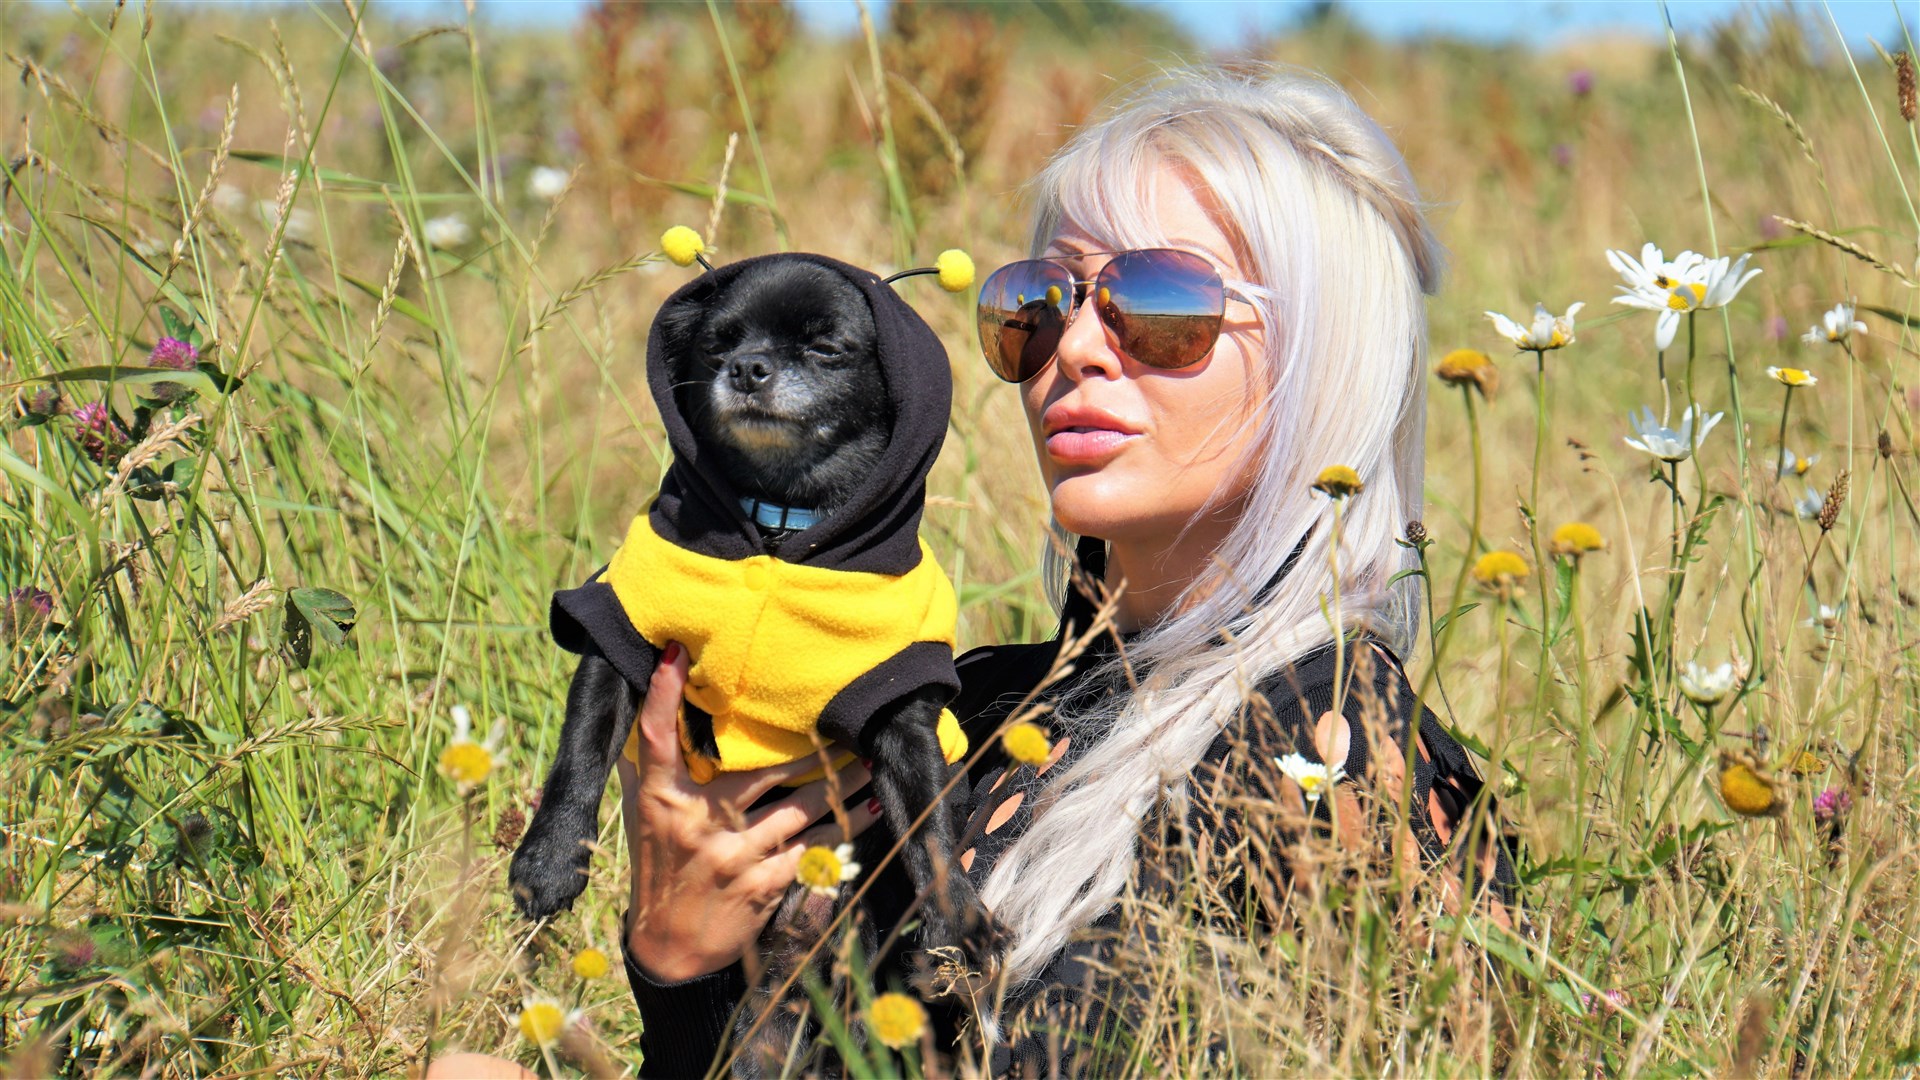 Natalie with her faithful companion Louis Vuitton the chihuahua dressed as a bumblebee. Pictures: DGS